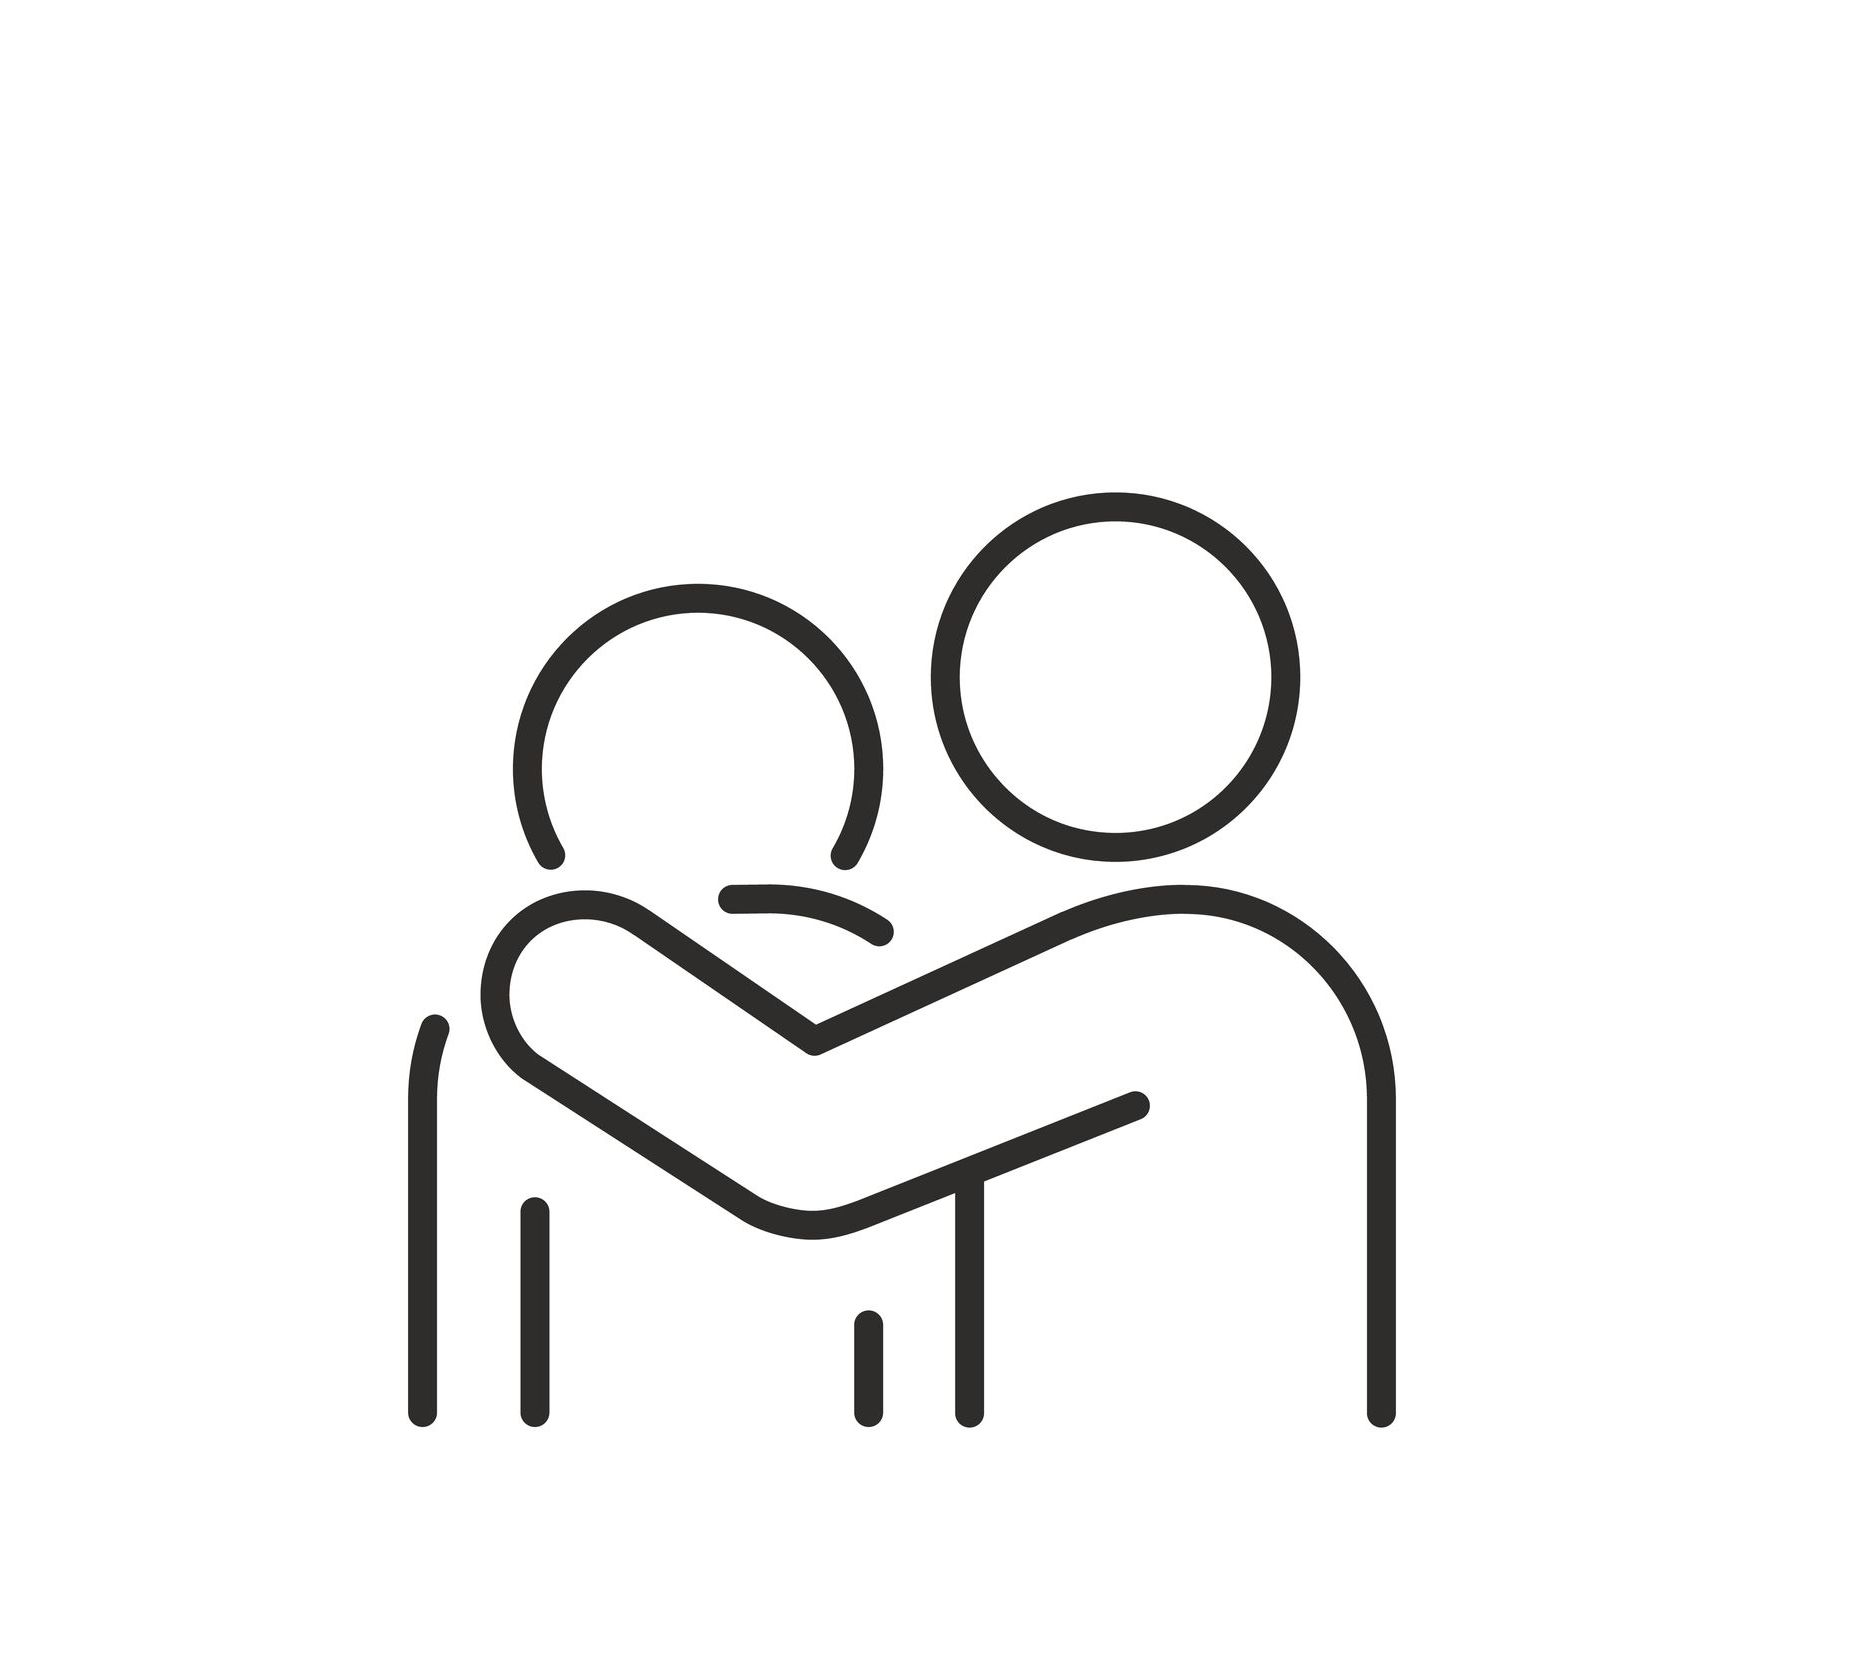 A line drawing of two people hugging each other.